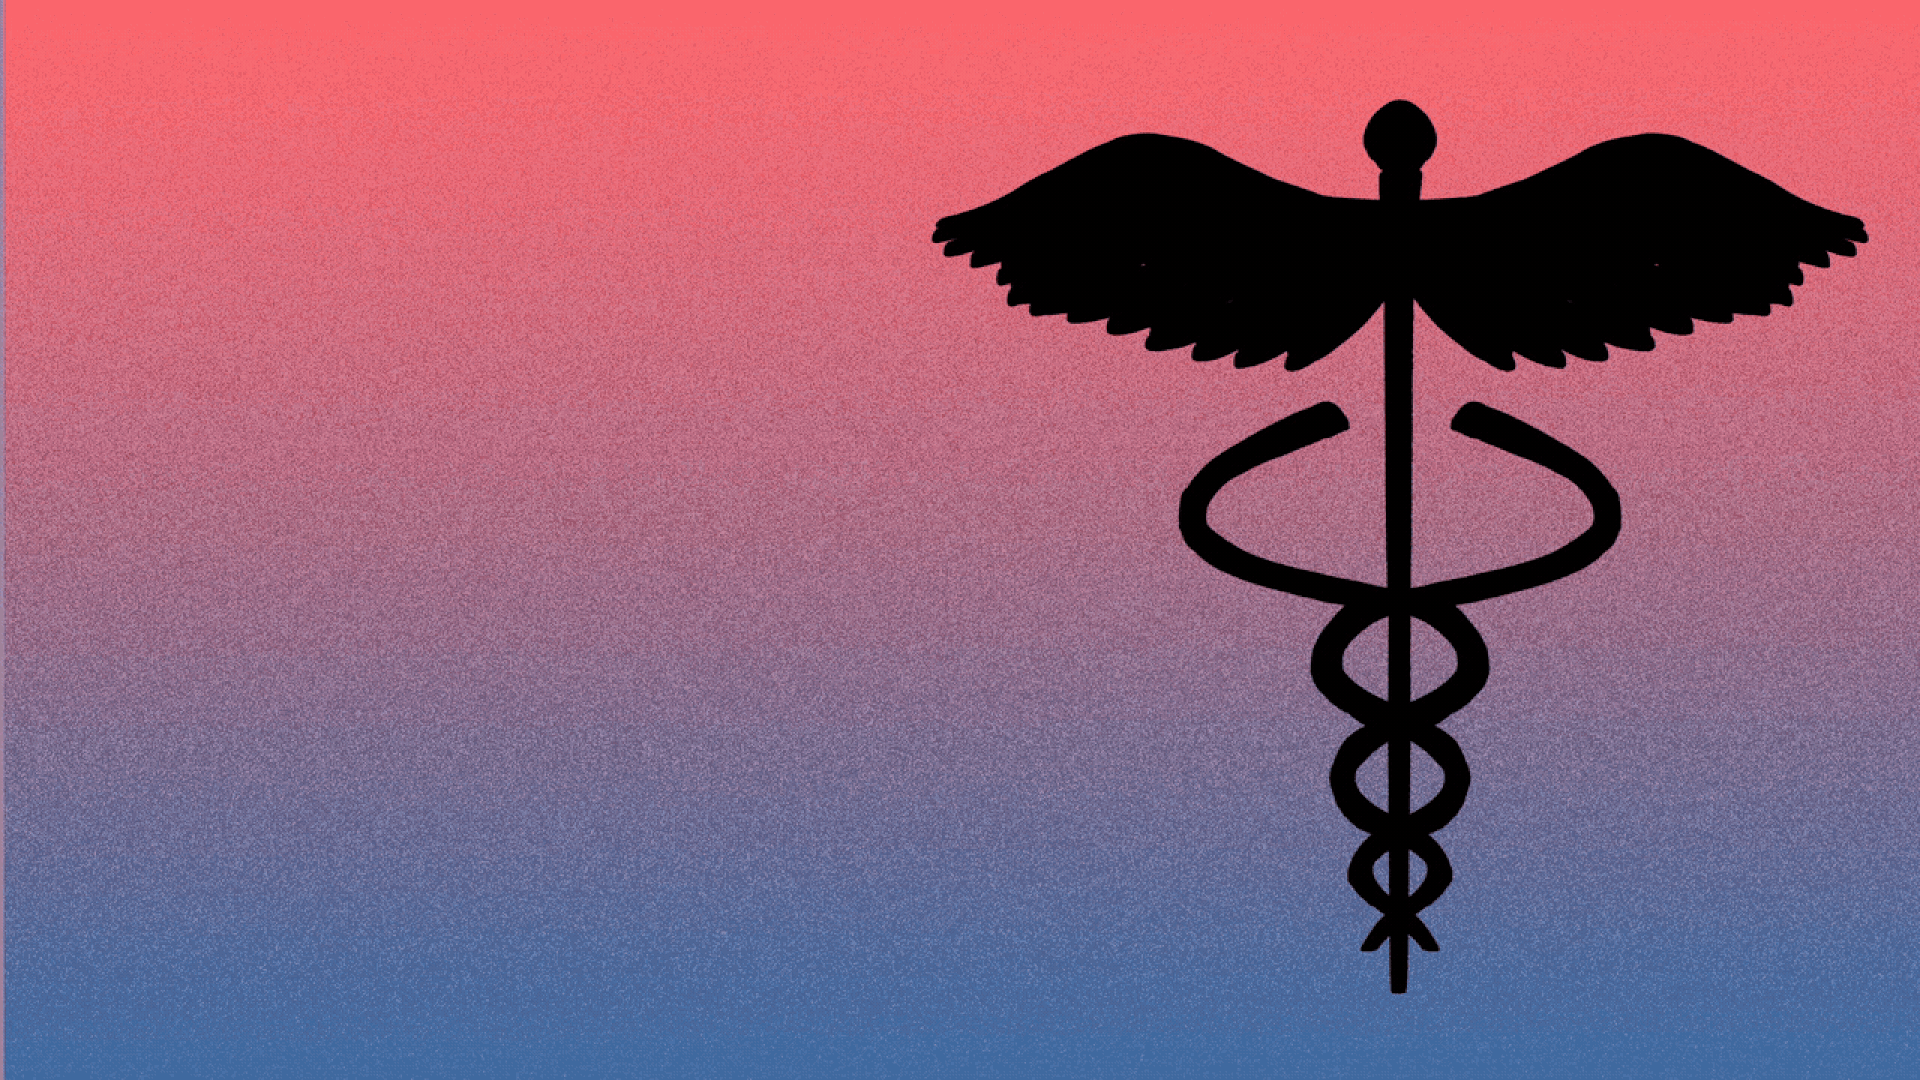 Illustration of a caduceus turning into a hammer.